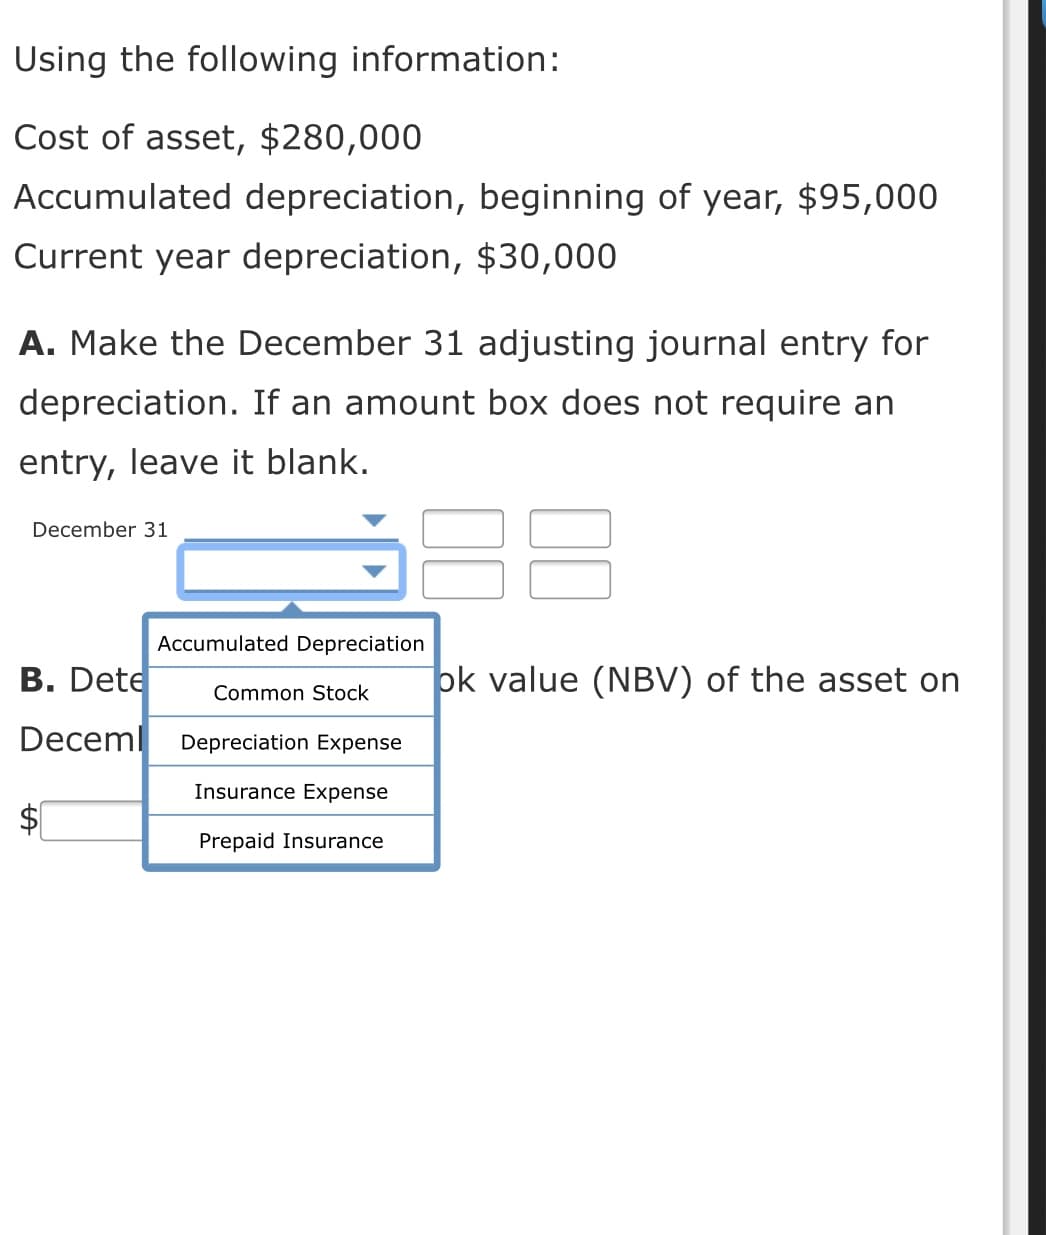 Using the following information:
Cost of asset, $280,000
Accumulated depreciation, beginning of year, $95,000
Current year depreciation, $30,000
A. Make the December 31 adjusting journal entry for
depreciation. If an amount box does not require an
entry, leave it blank.
December 31
Accumulated Depreciation
B. Dete
ok value (NBV) of the asset on
Common Stock
Deceml
Depreciation Expense
Insurance Expense
Prepaid Insurance
%24
